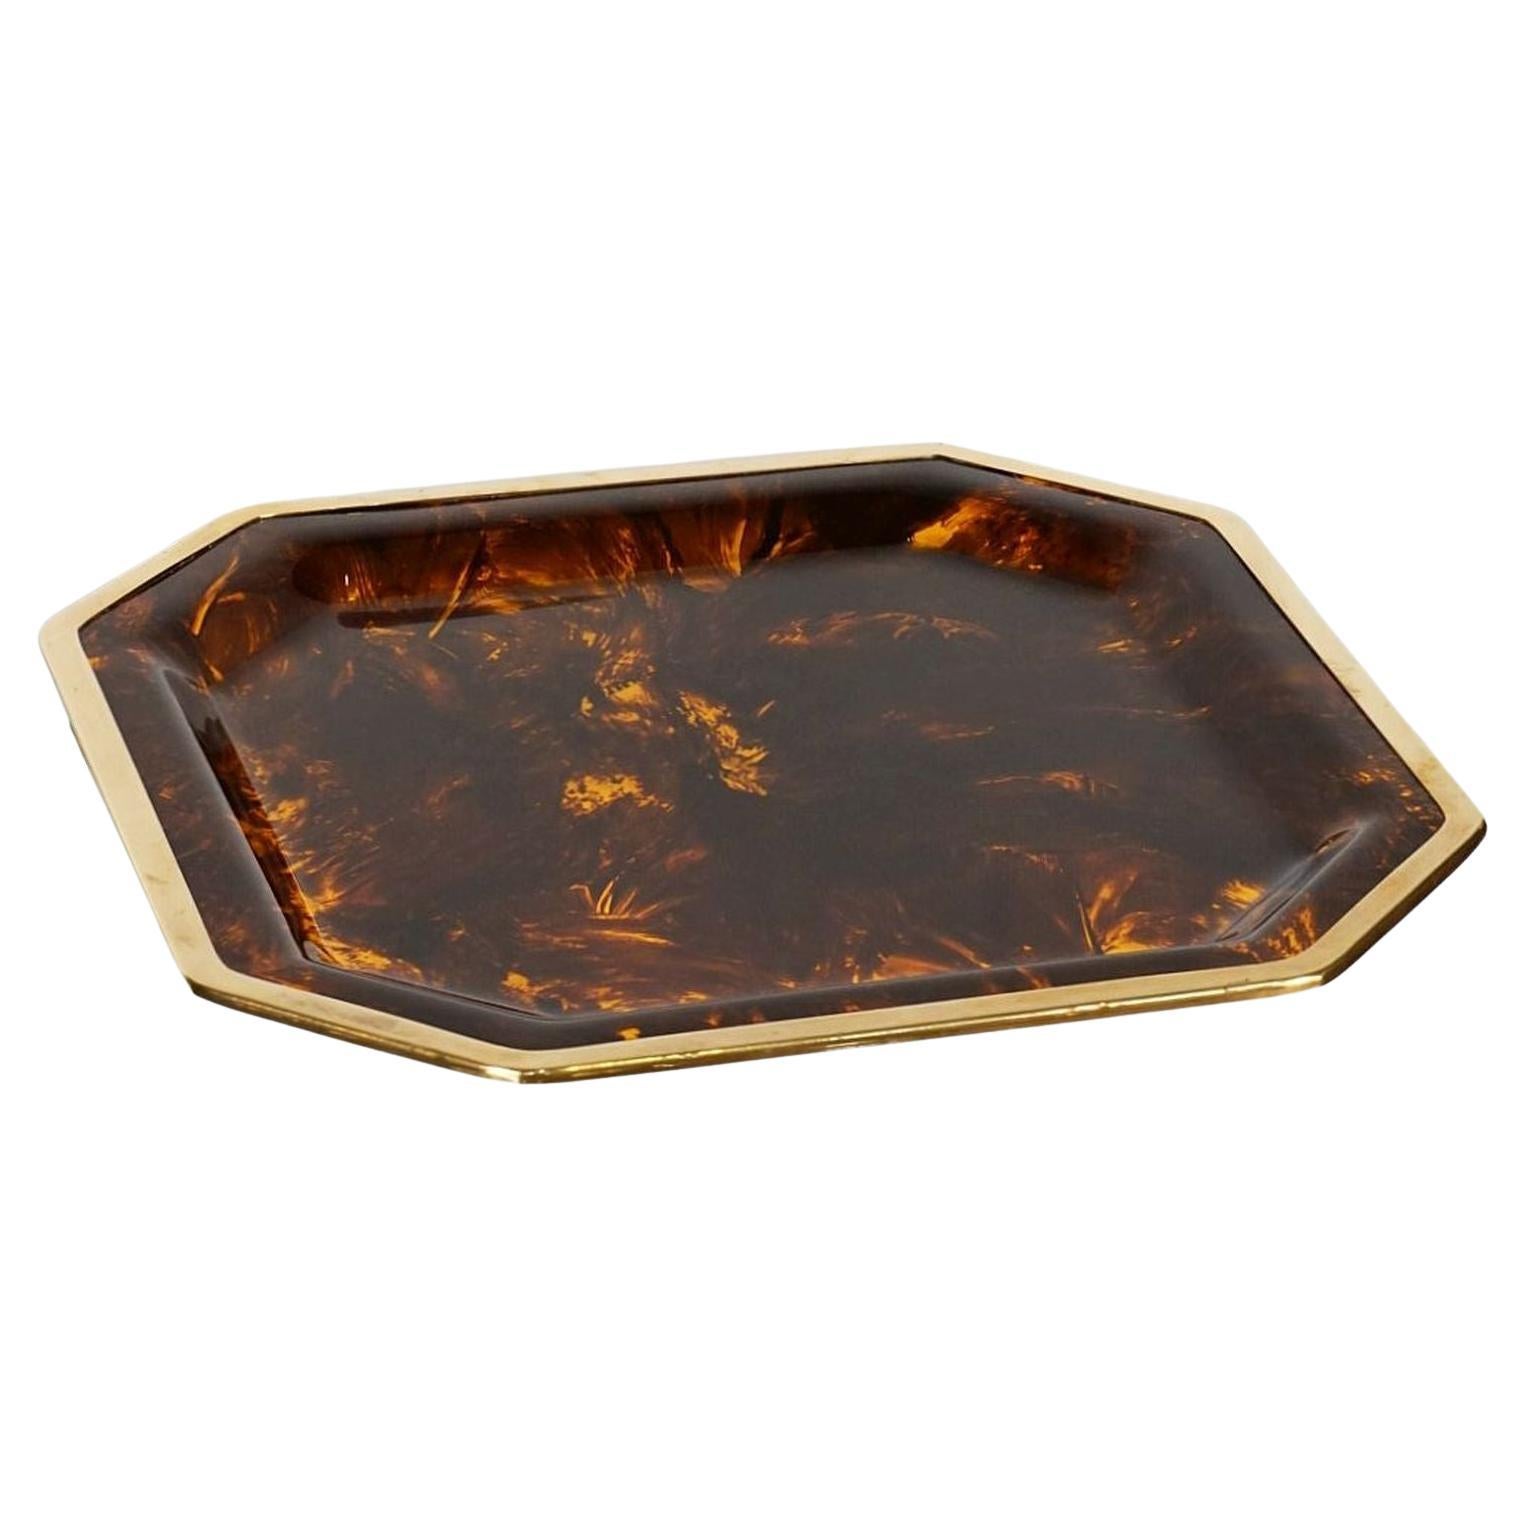 Octagonal Faux Tortoise Lucite Tray from France (Diameter 18 1/2)